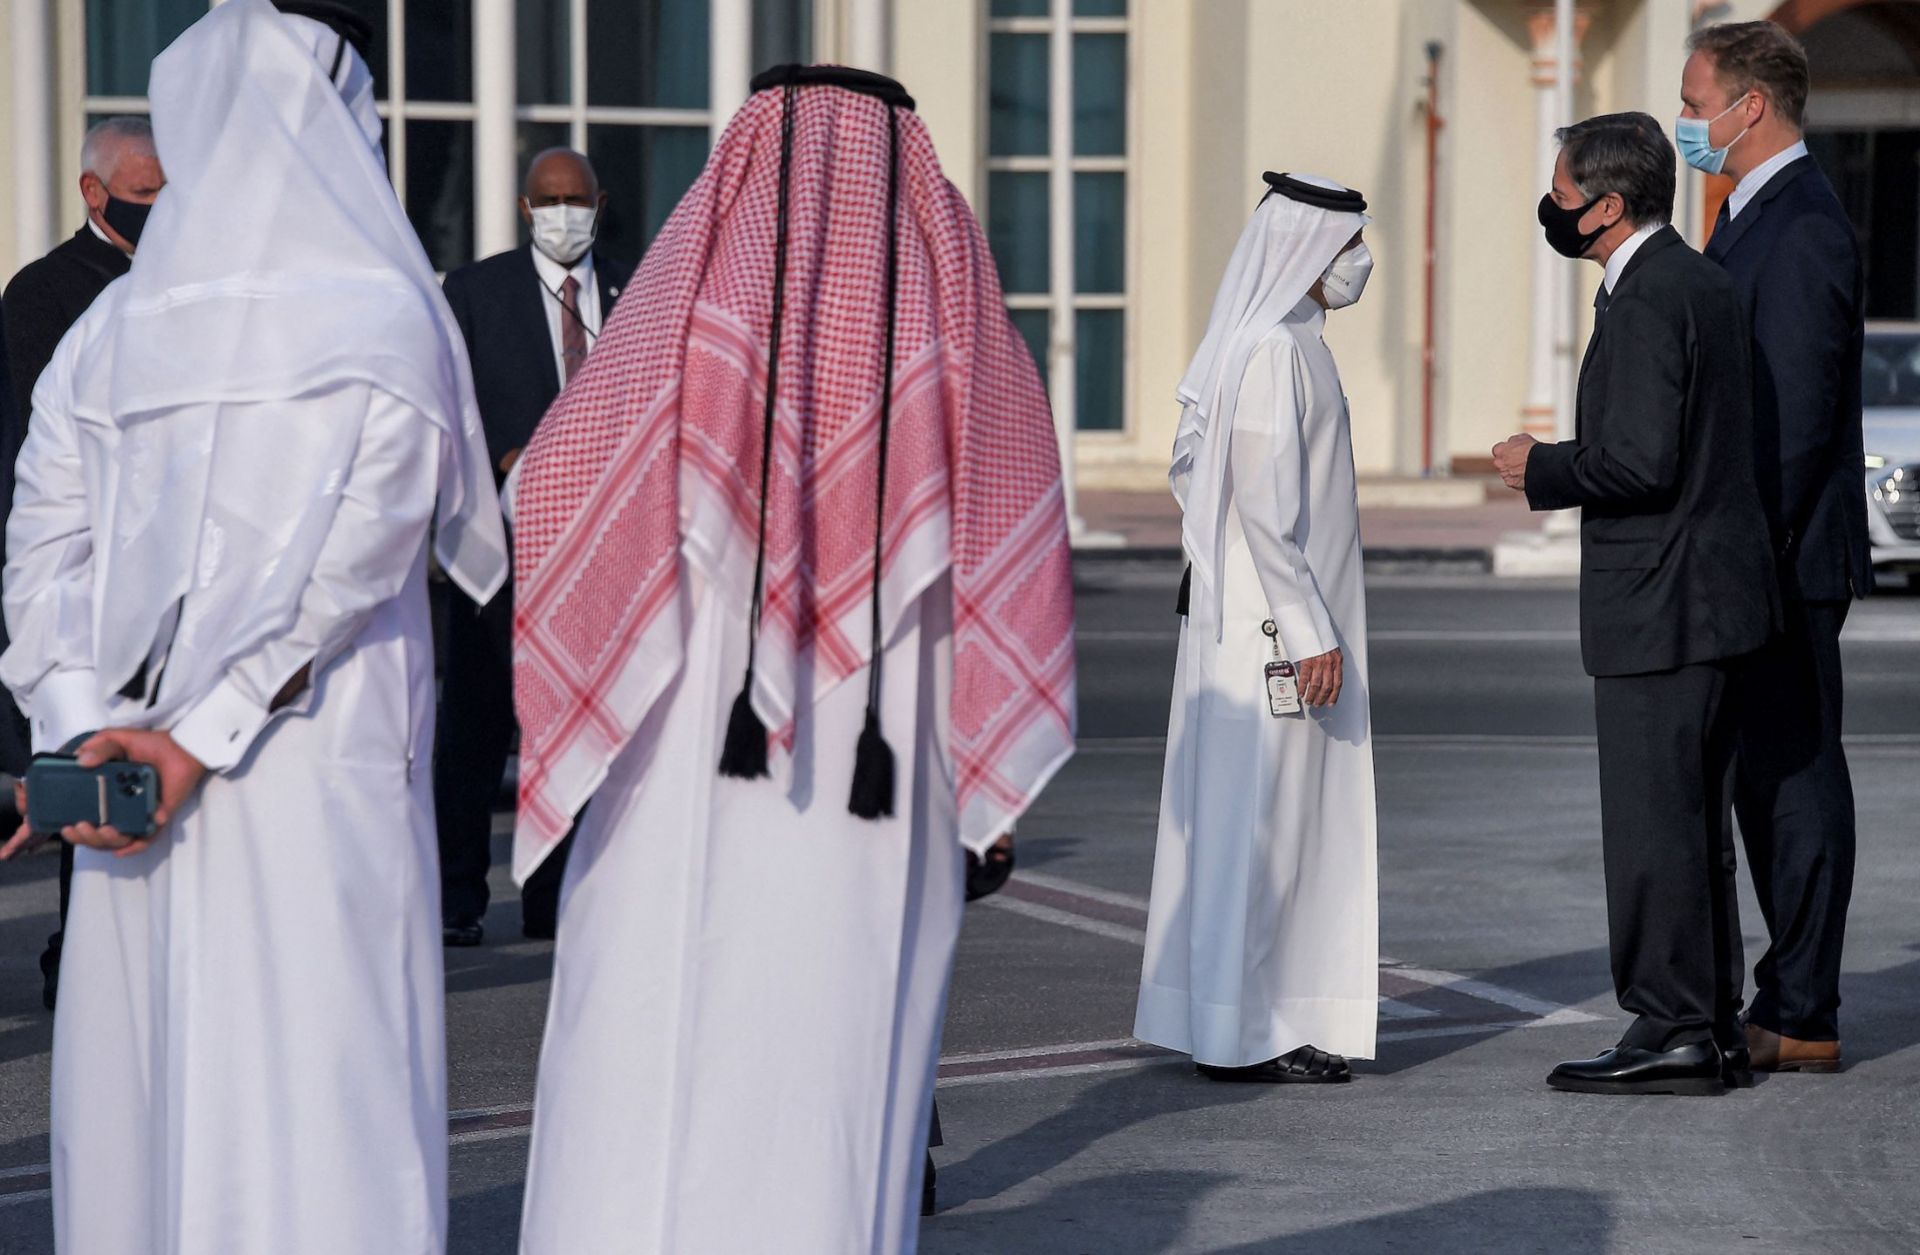 U.S. Secretary of State Antony Blinken speaks with Qatari government officials before boarding an aircraft in Doha on Sept. 8, 2021. 